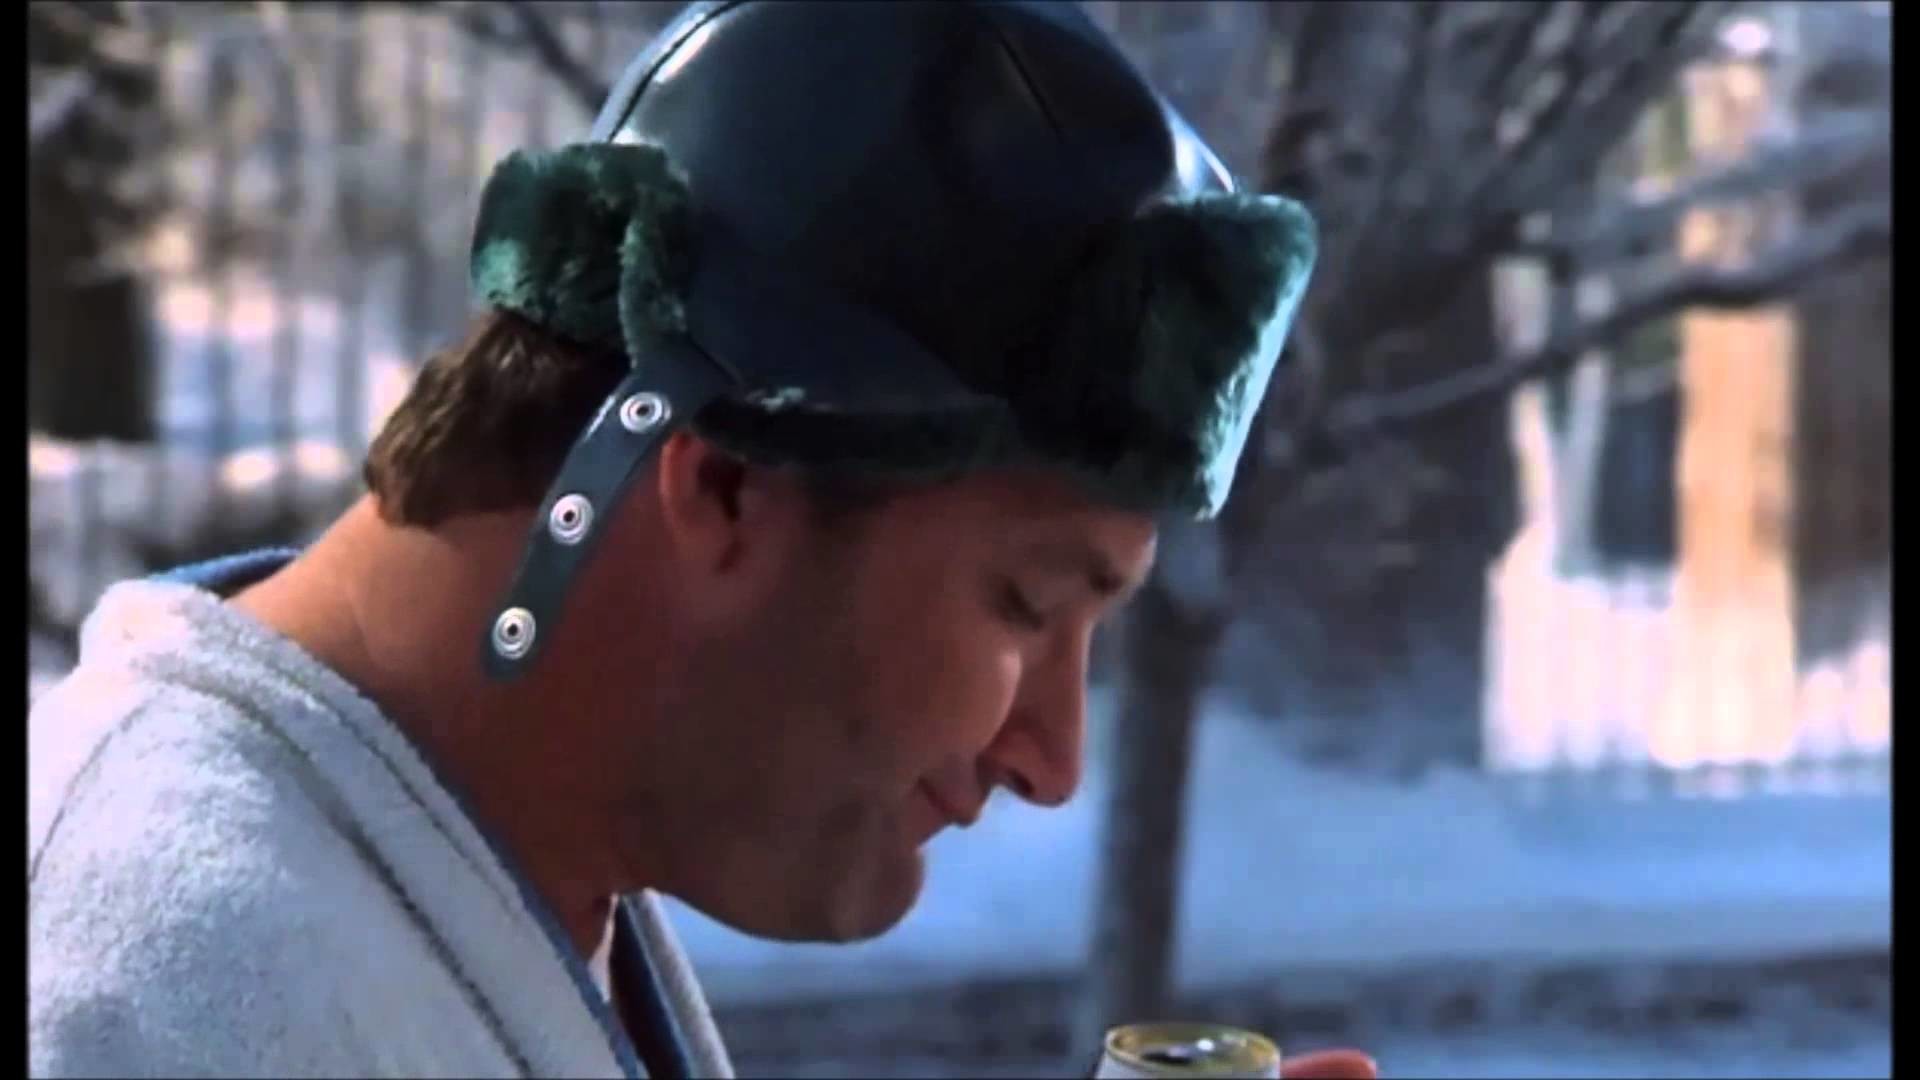 1920x1080 Christmas Vacation ~ "Merry Christmas, Shitter Was Full"